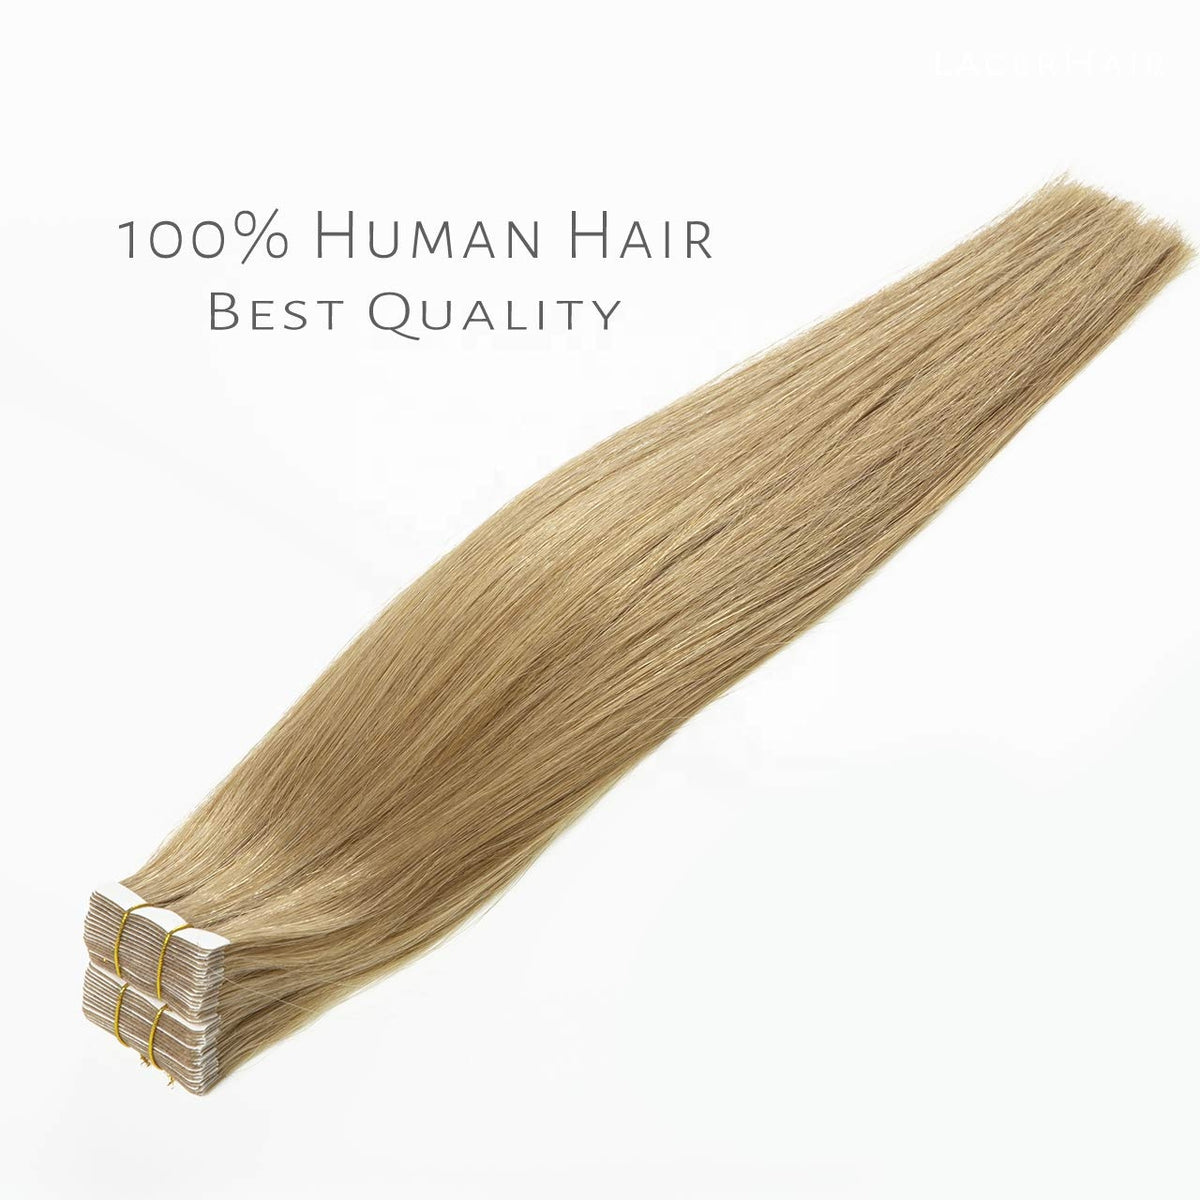 16" Hair Extensions Human Hair Tape in Dirty Blonde #12 Tape Attached Invisible Seamless Skin Weft